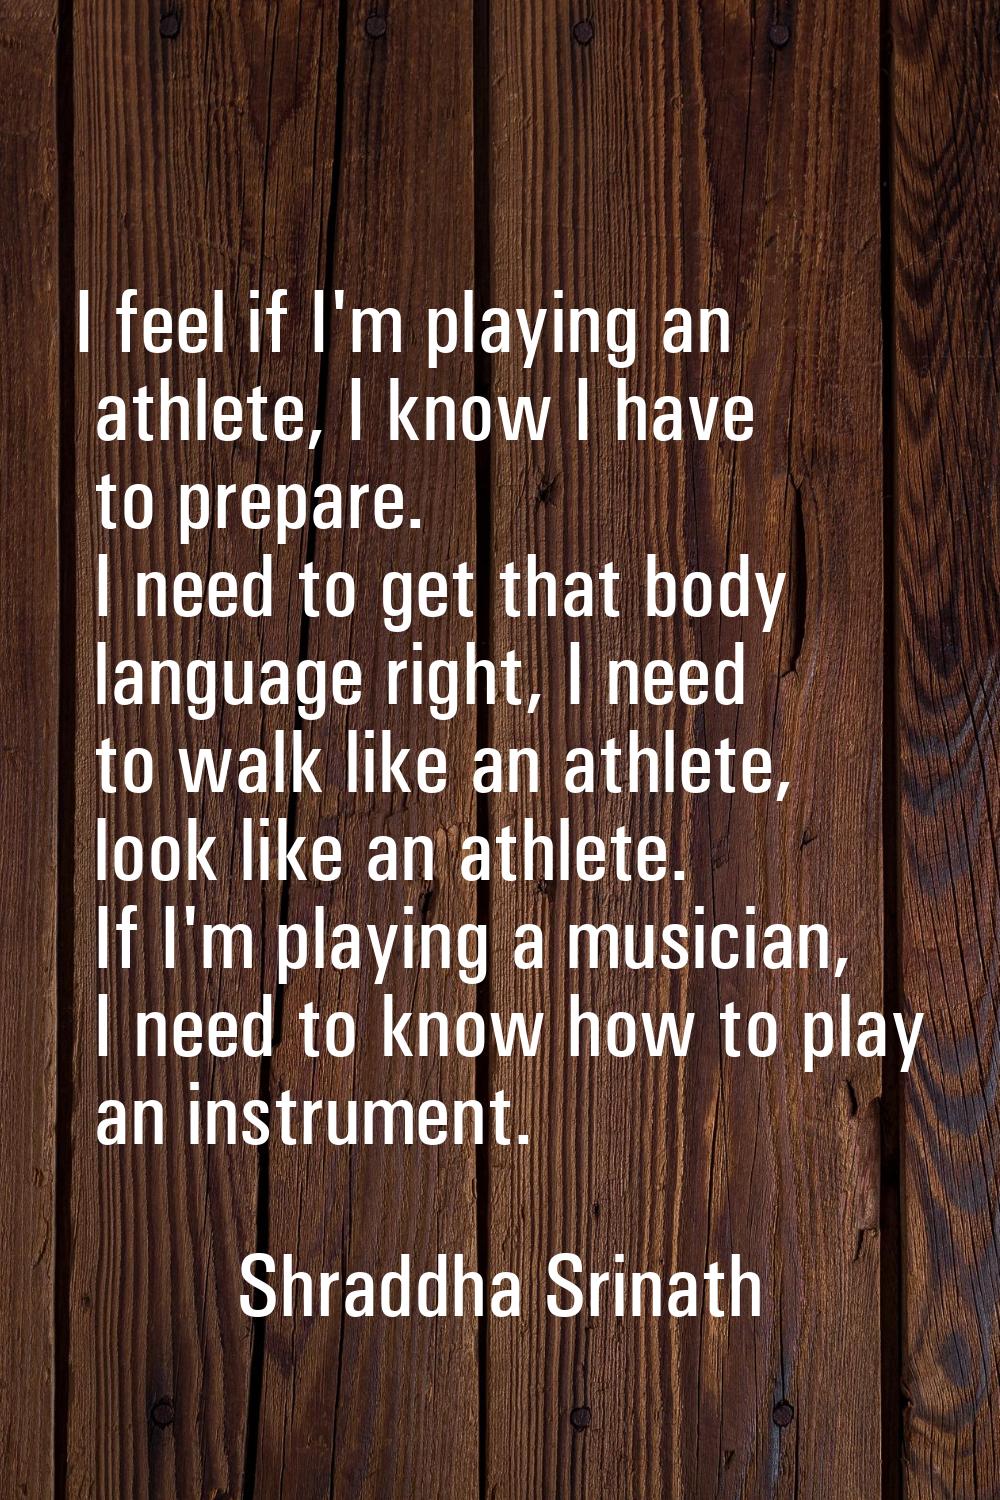 I feel if I'm playing an athlete, I know I have to prepare. I need to get that body language right,